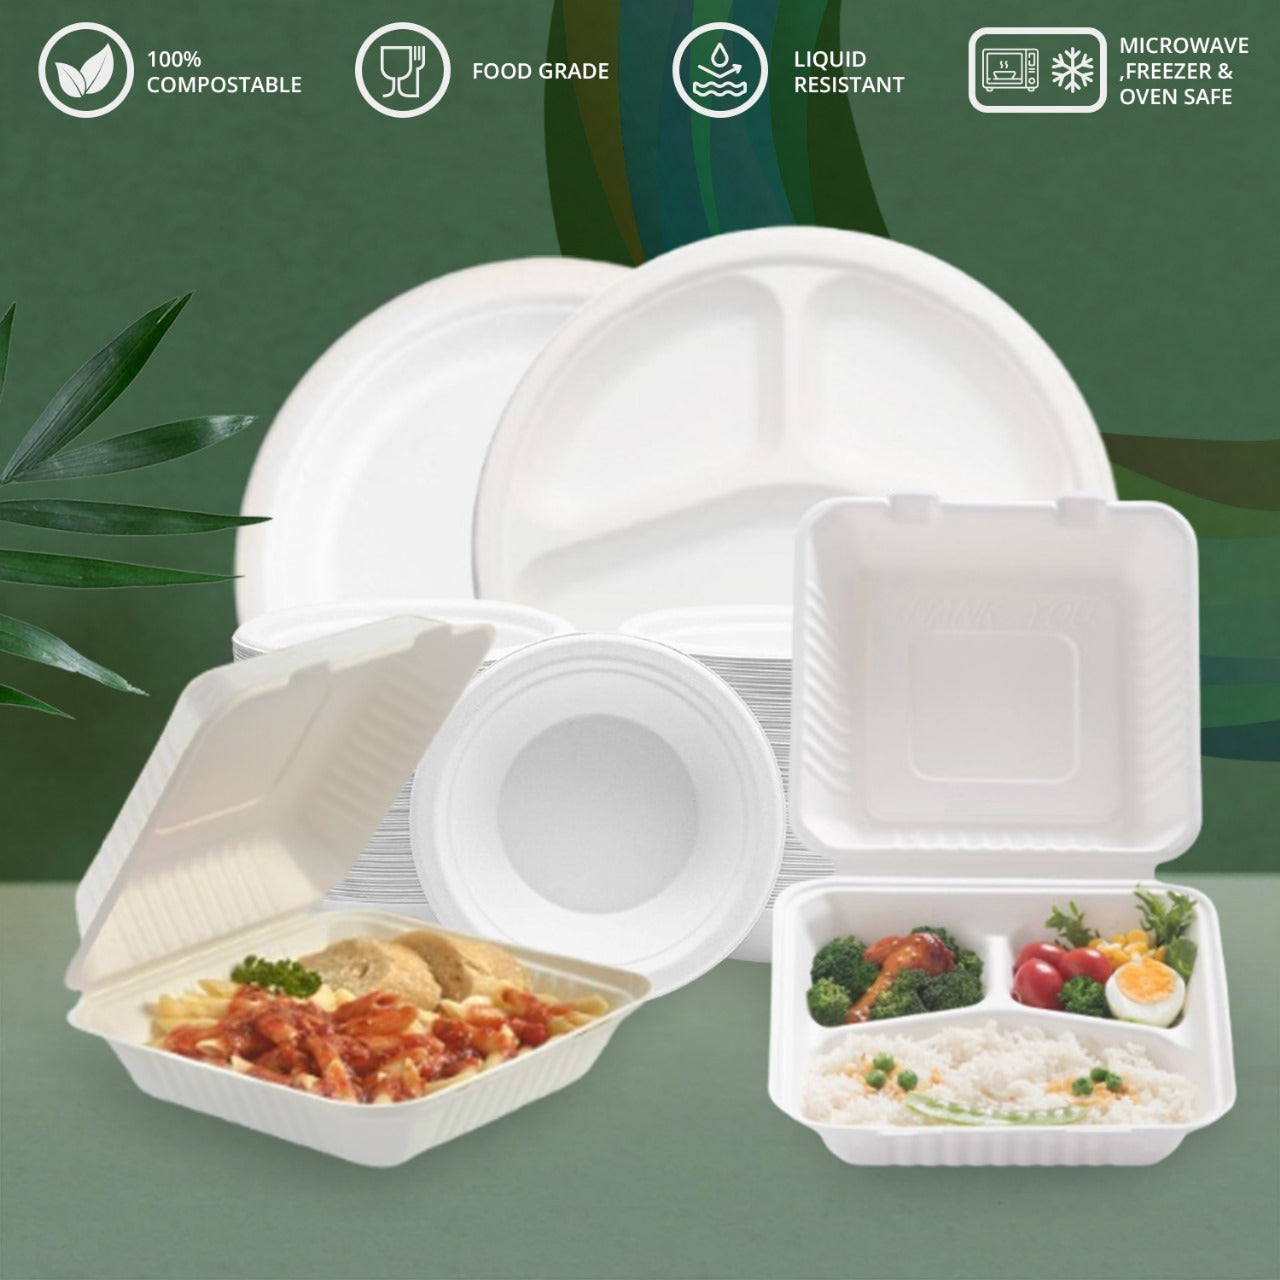 Compostable Paper Products